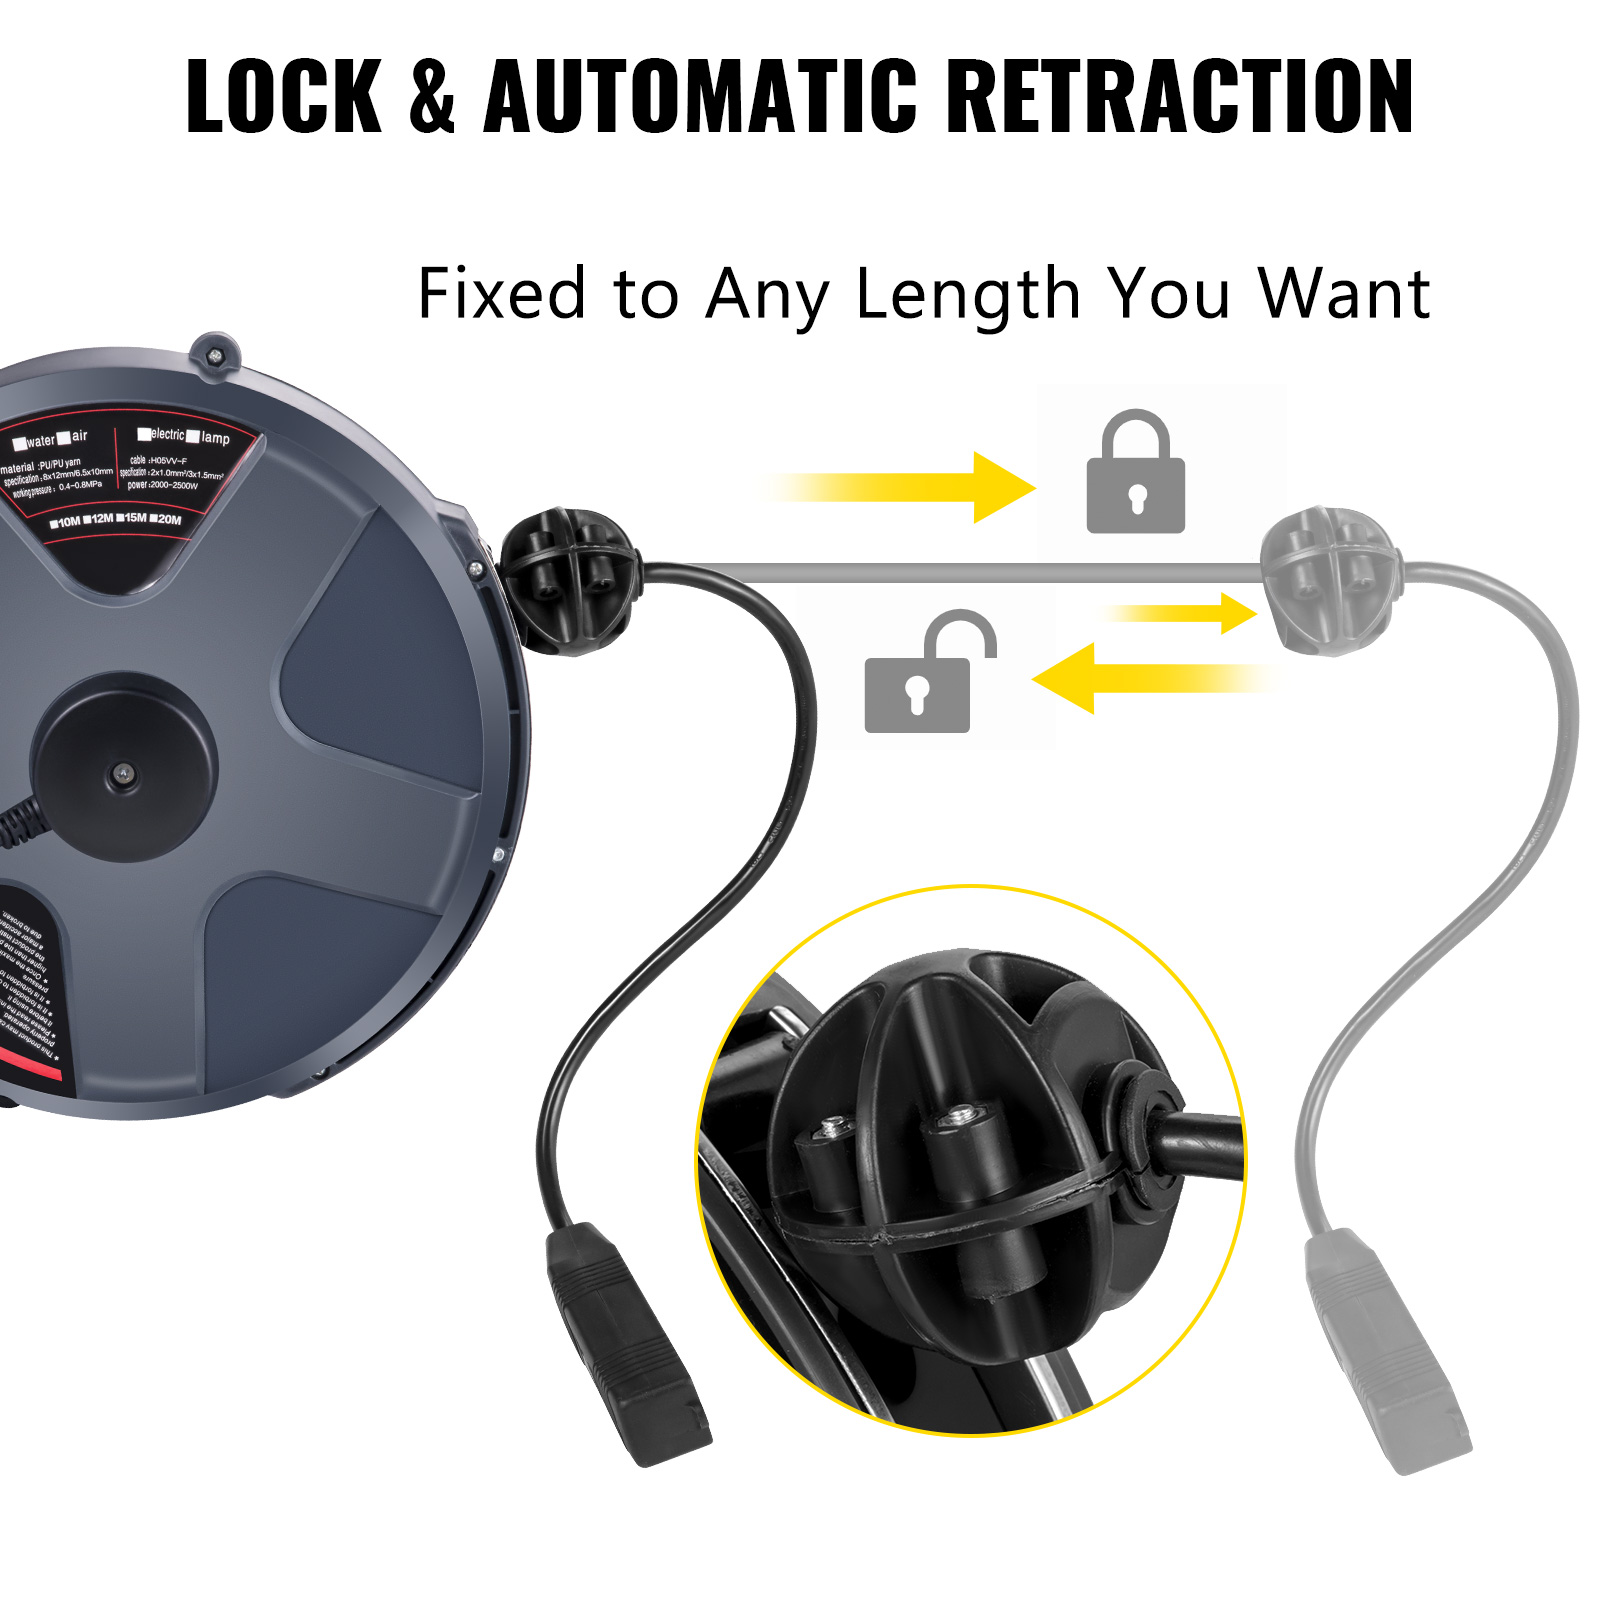 VEVOR Retractable Extension Cord Reel, 50 ft, Heavy Duty 14AWG/3C SJTOW  Power Cord, with Lighted Triple Tap Outlet, 13 Amp Circuit Breaker, 180°  Swivel Bracket for Ceiling or Wall Mount, UL Listed 